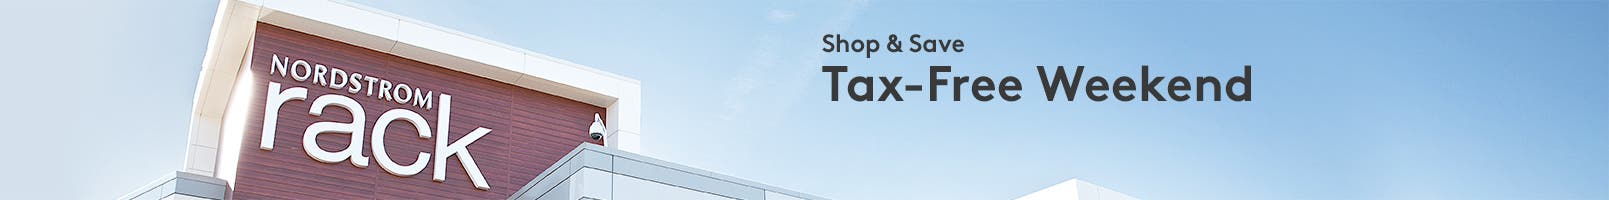 Shop and save during Tax-Free Weekend at Nordstrom Rack.